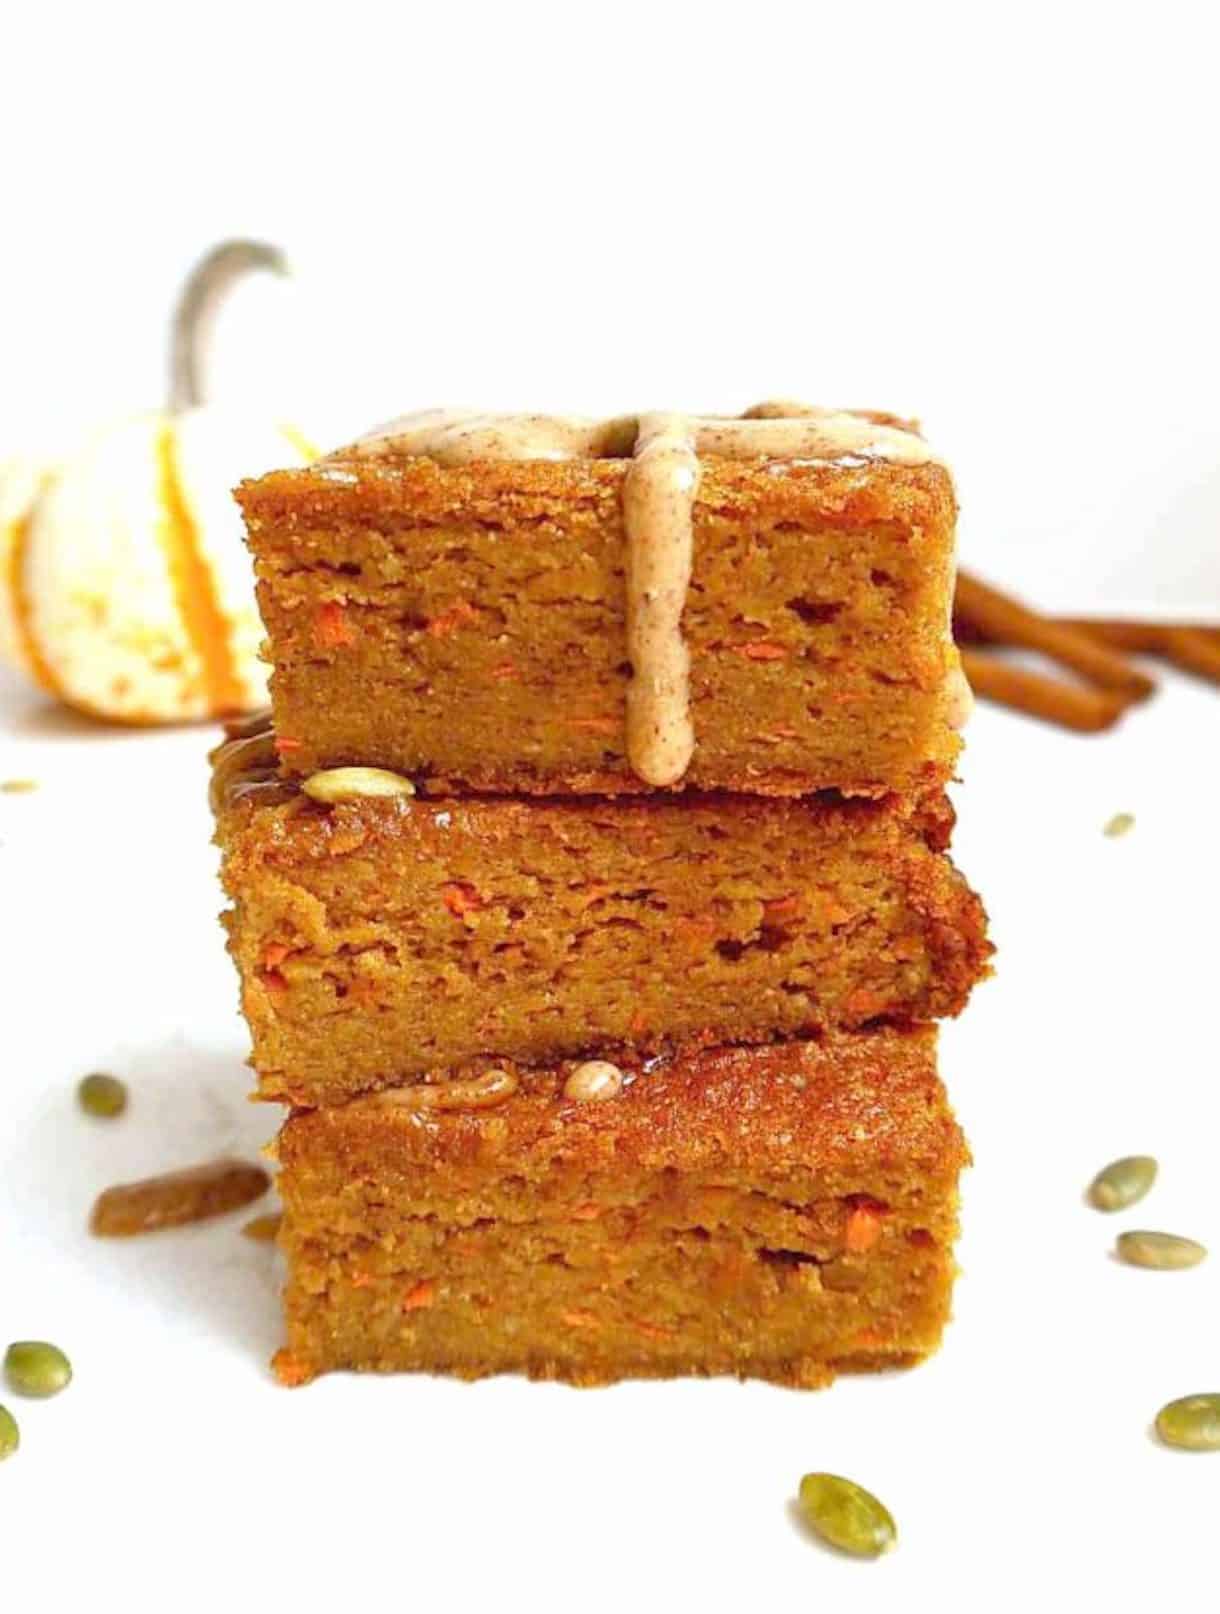 Gluten-free pumpkin carrot cake slices stacked on top of each other.